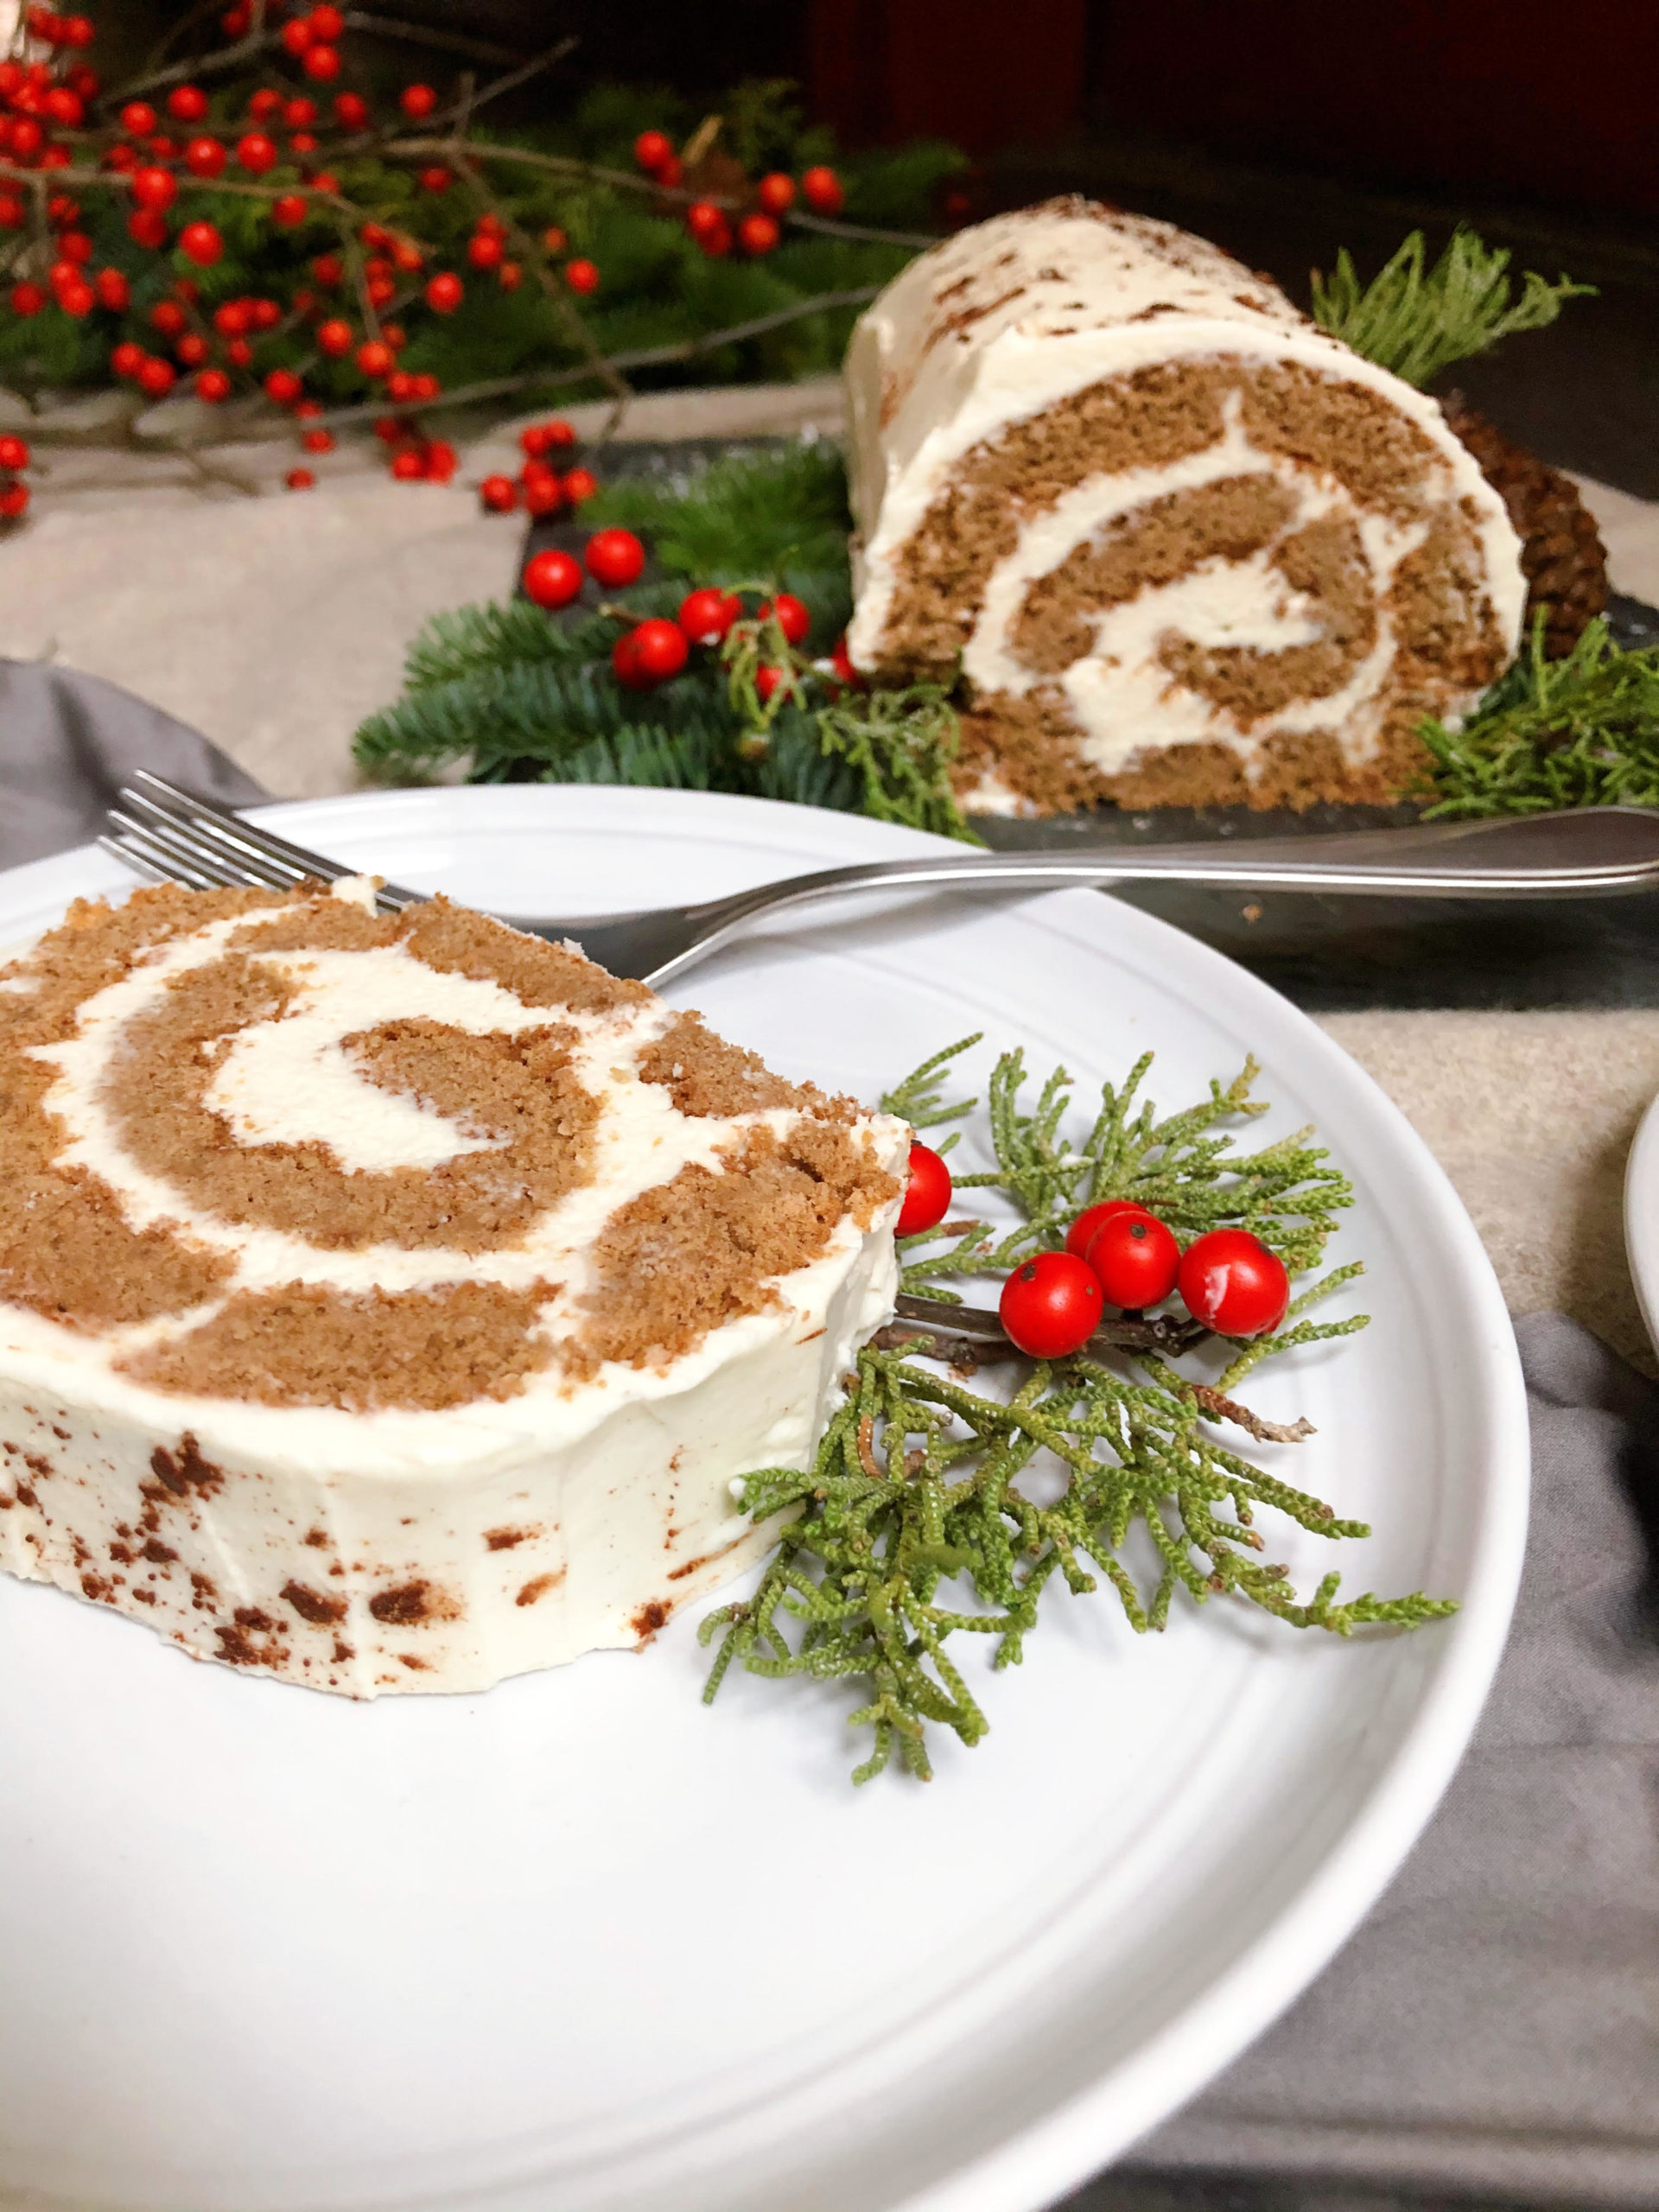 A delightfully spicy and sweet, refreshingly nostalgic Gingerbread cake roll (swiss roll). Frosted with a cream cheese frosting, this cake is going to be the perfect final note to any holiday dinner!